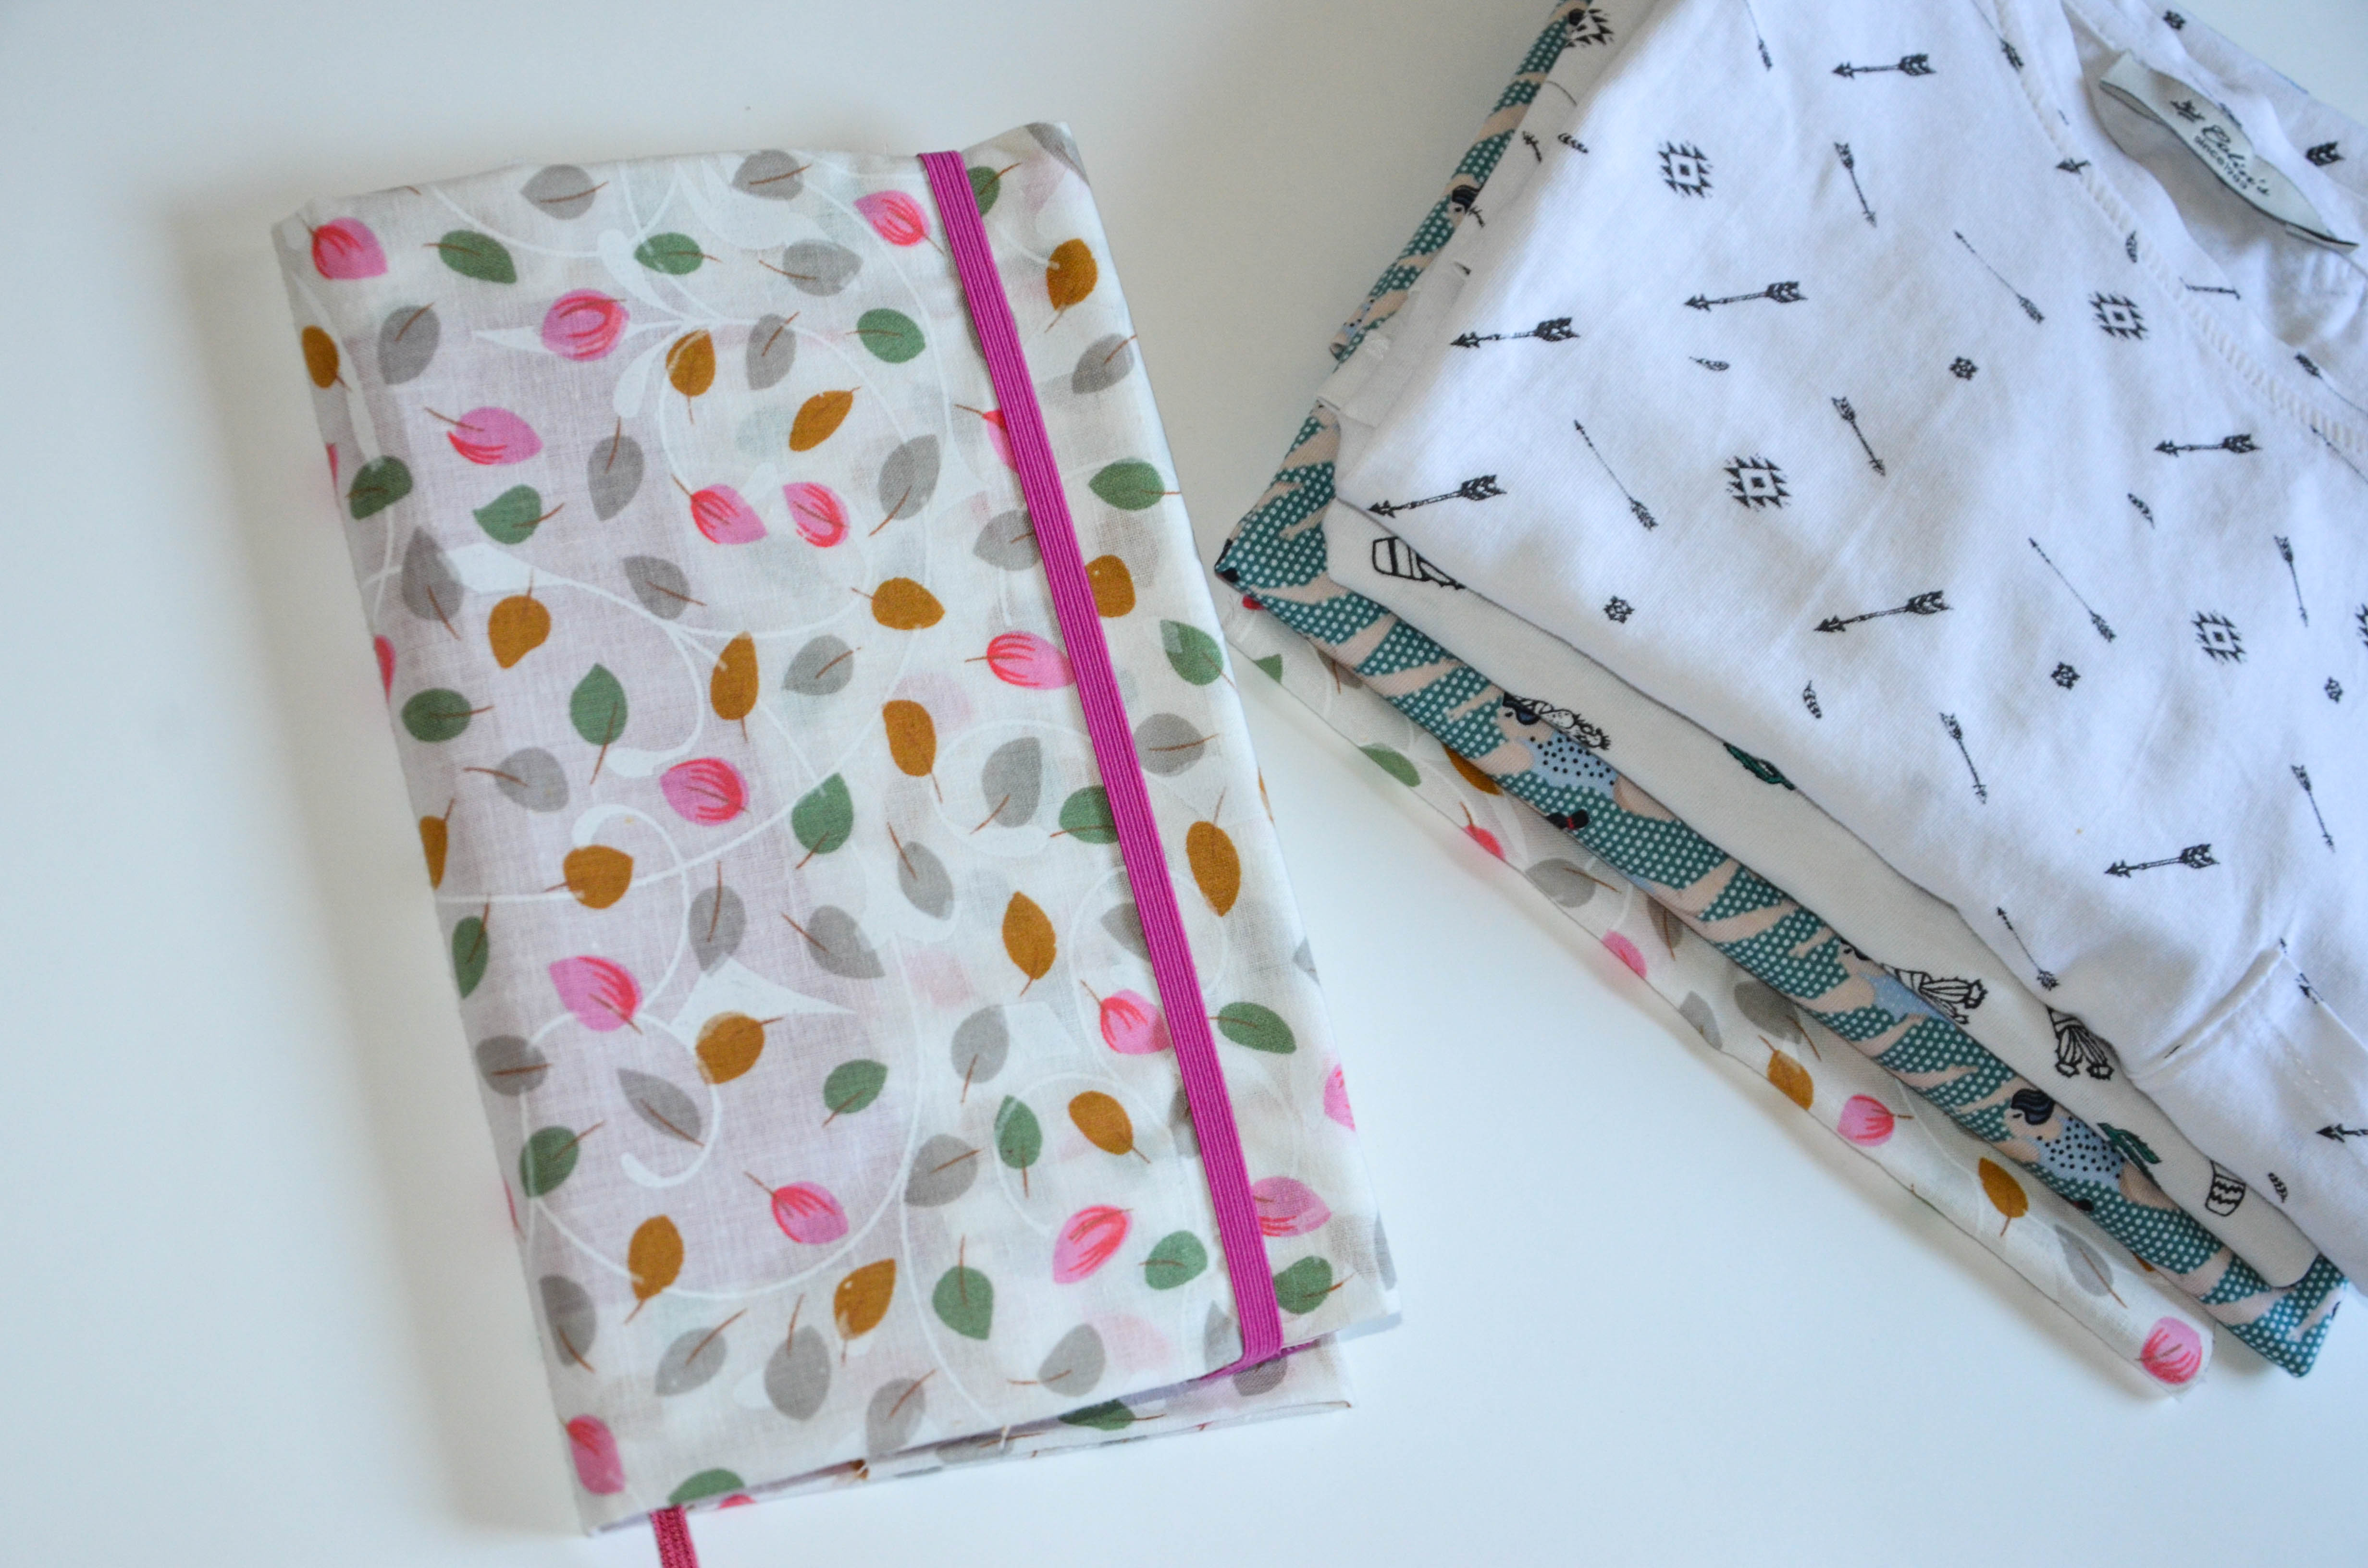 Miniprints go with planners